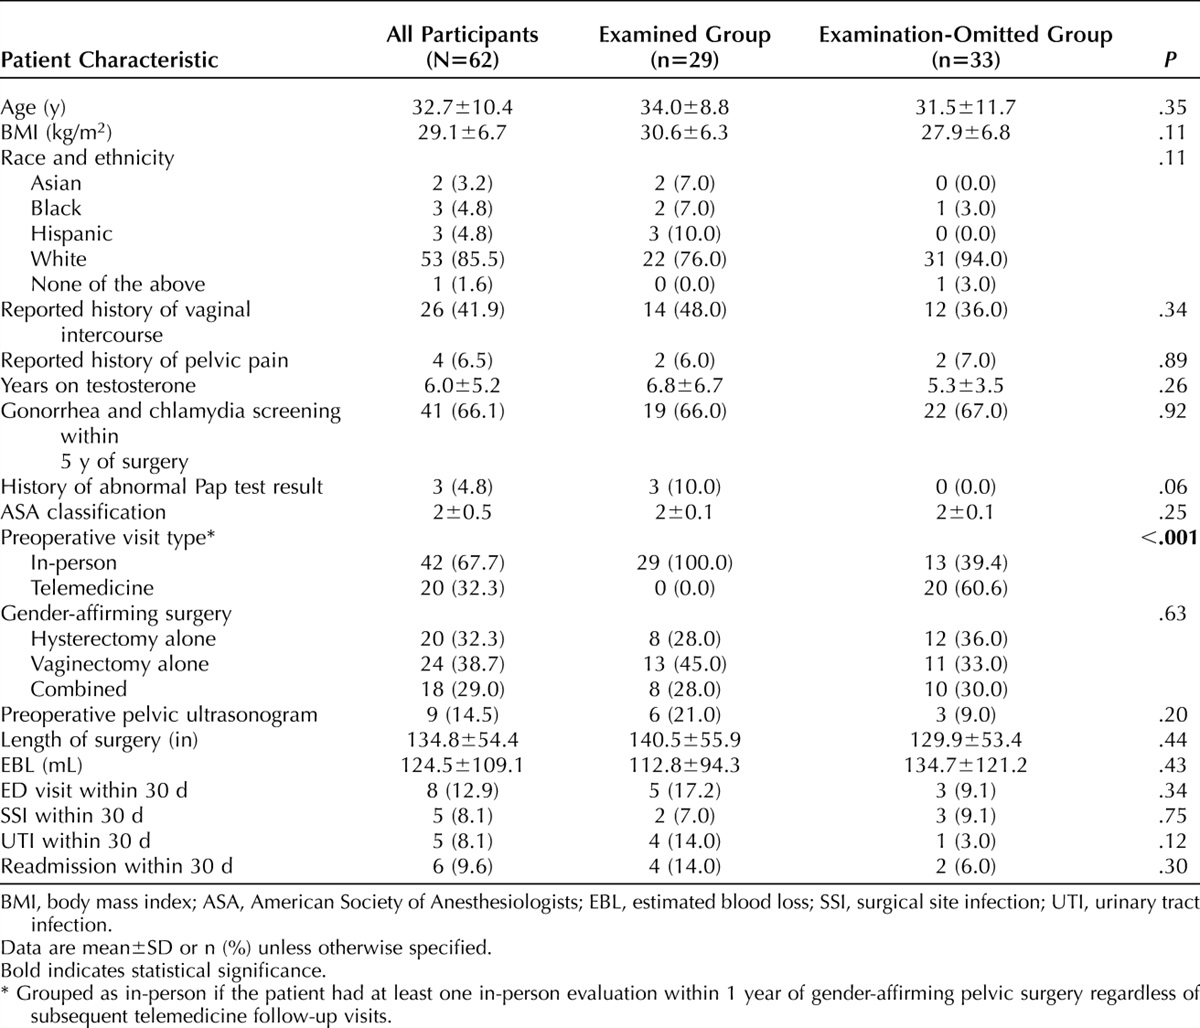 Omission of Pelvic Examination Before Gender-Affirming Hysterectomy and Vaginectomy